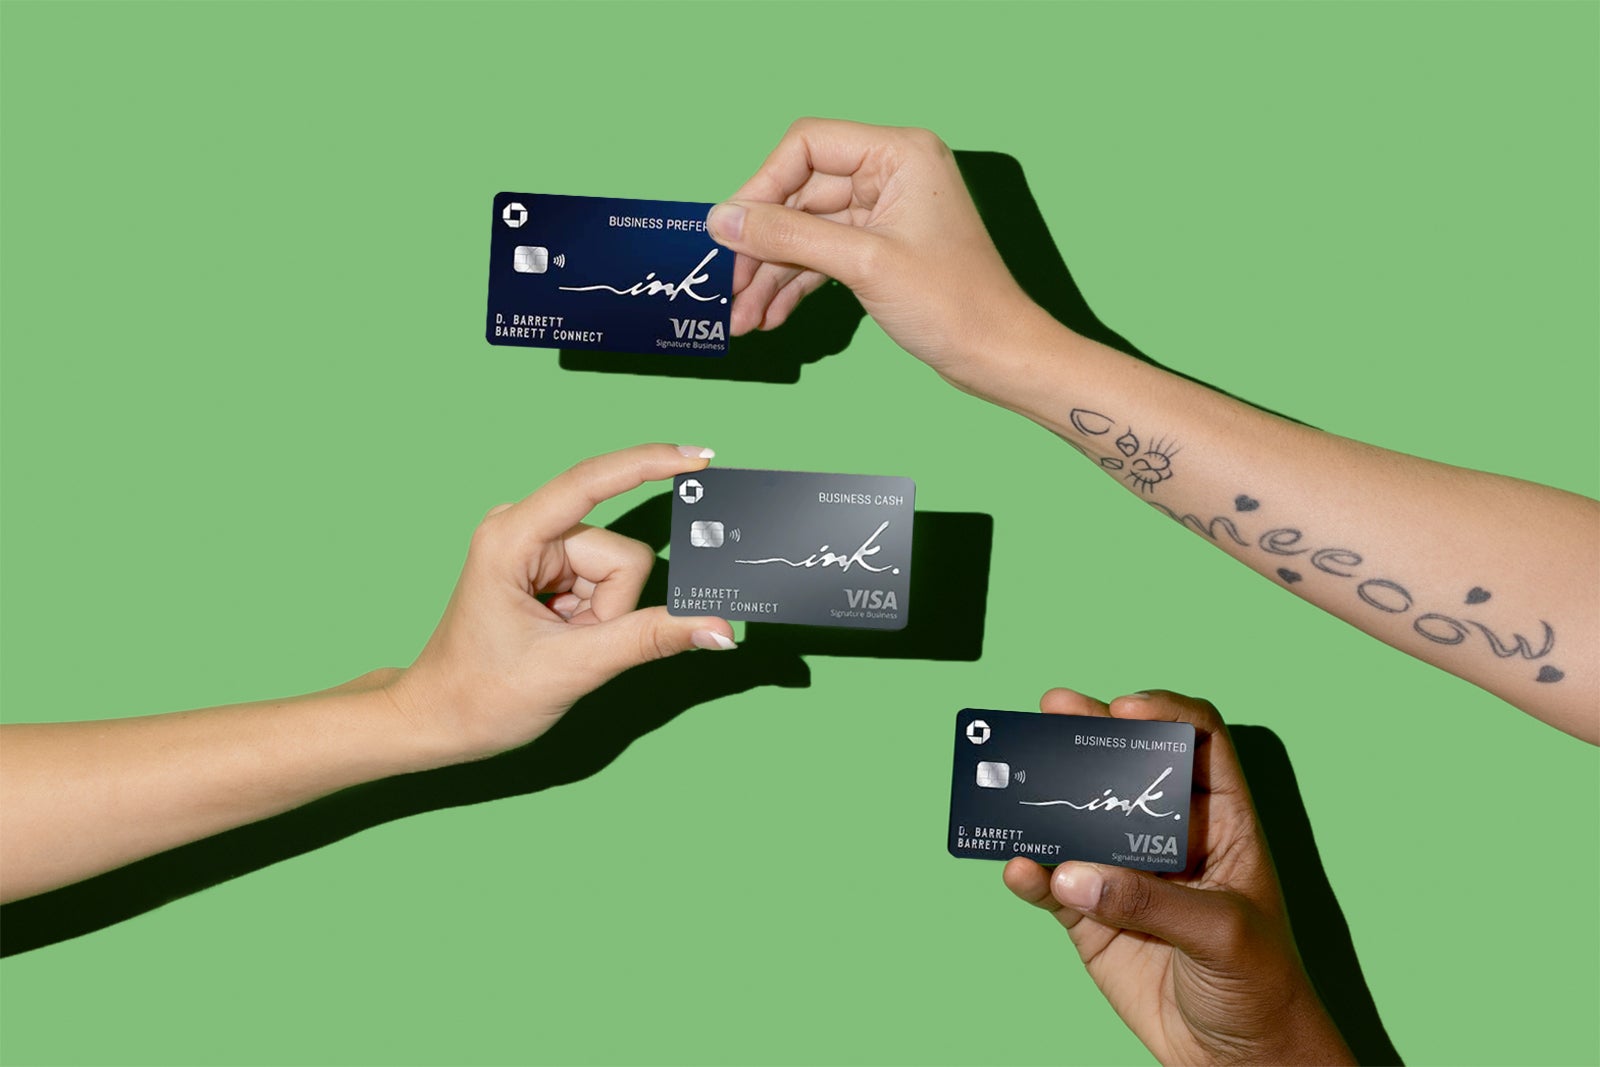 hands hold multiple Chase business credit cards